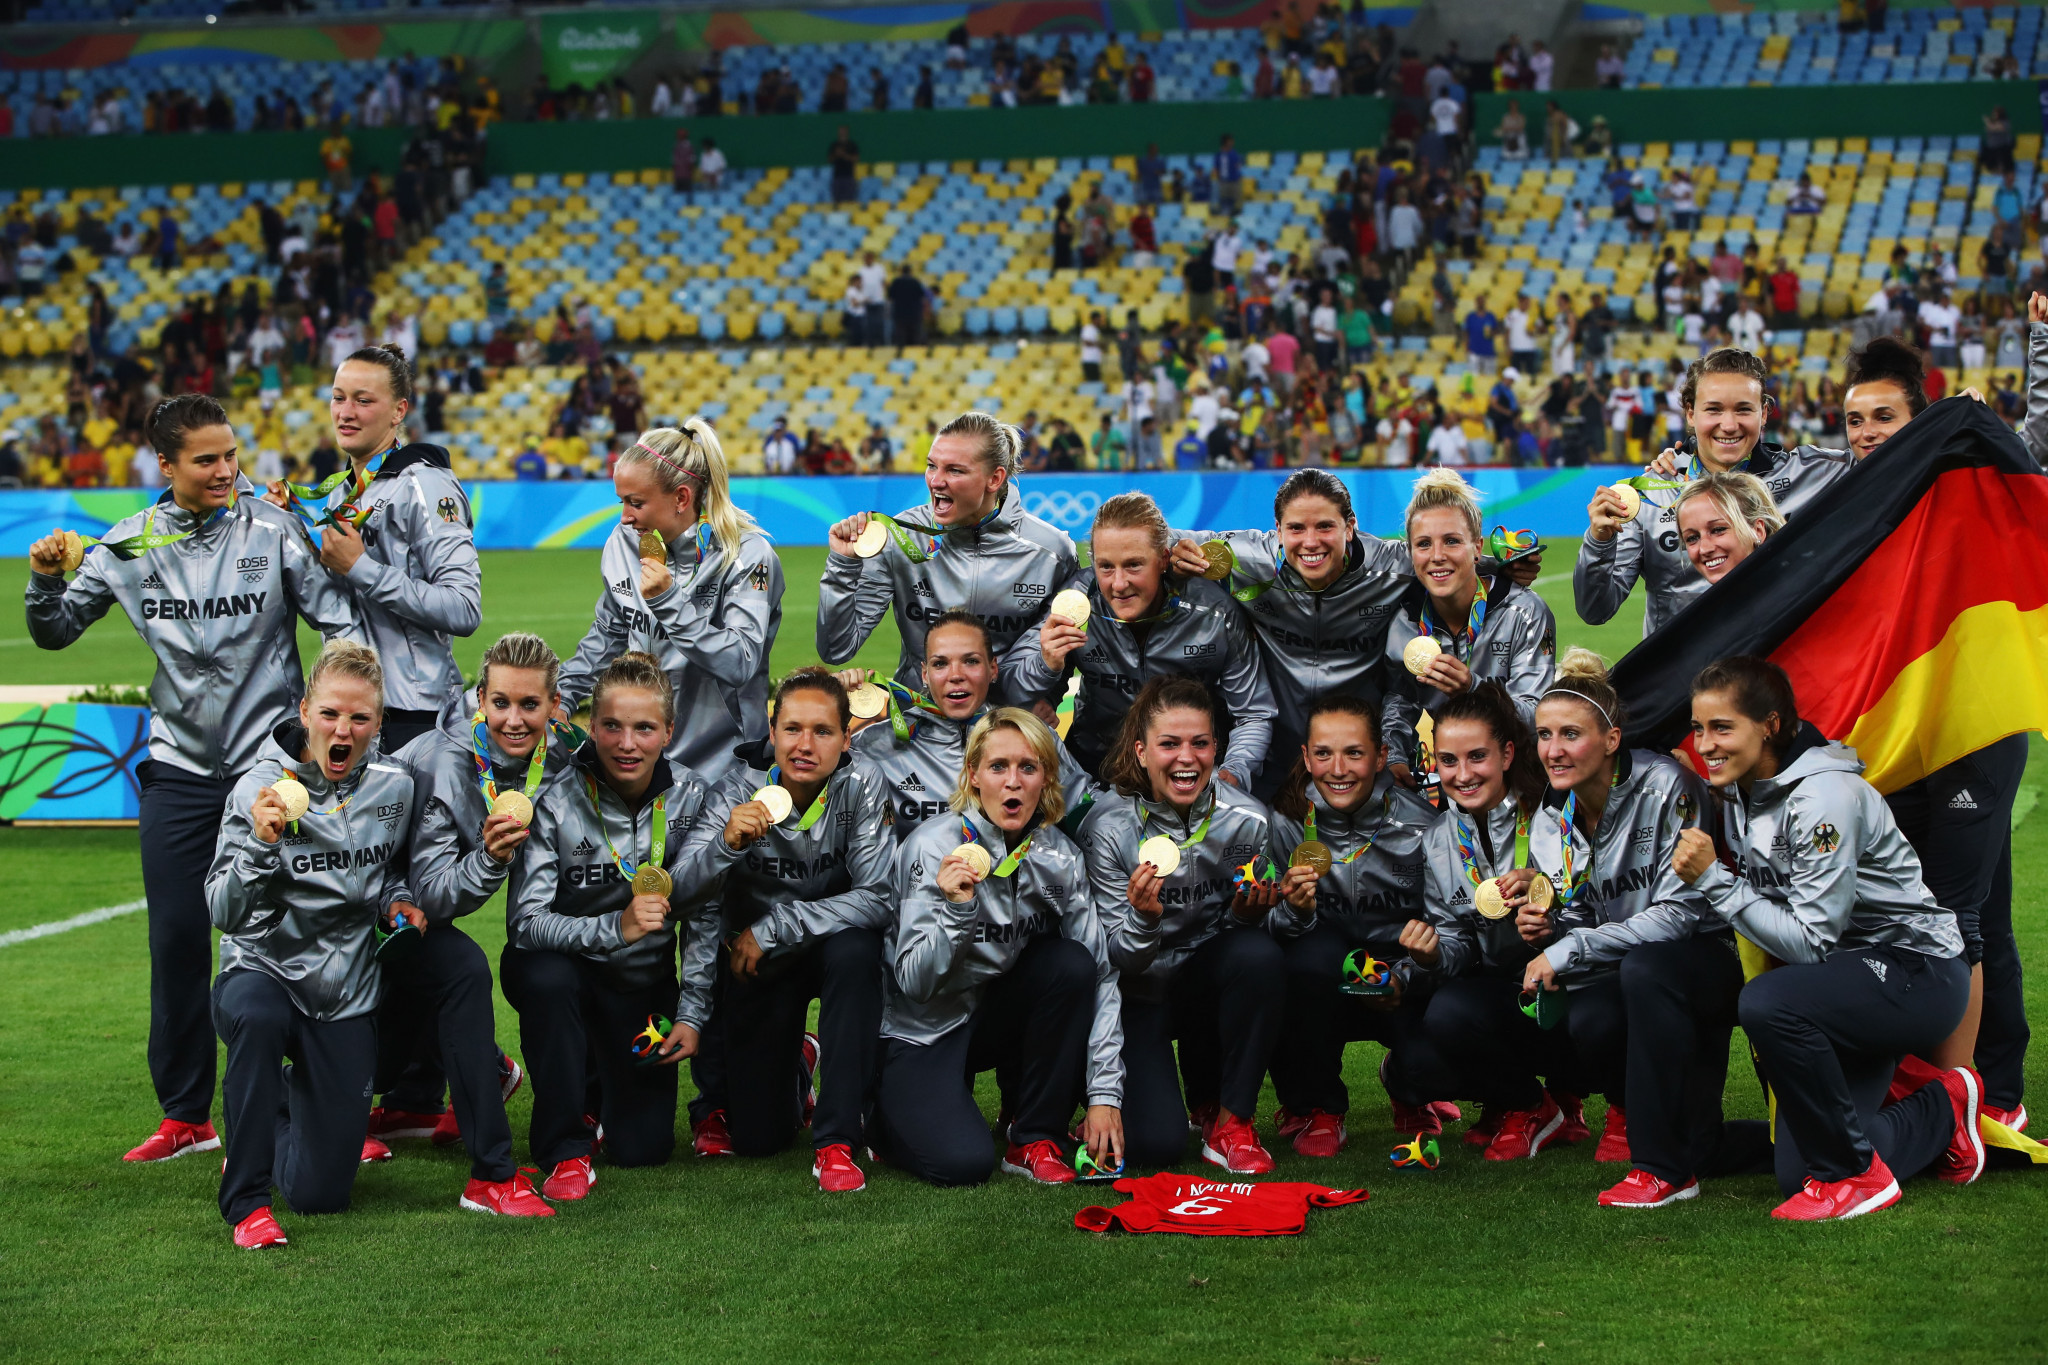 Germany won the gold medal at Rio 2016, but failed to qualify for Tokyo 2020 ©Getty Images